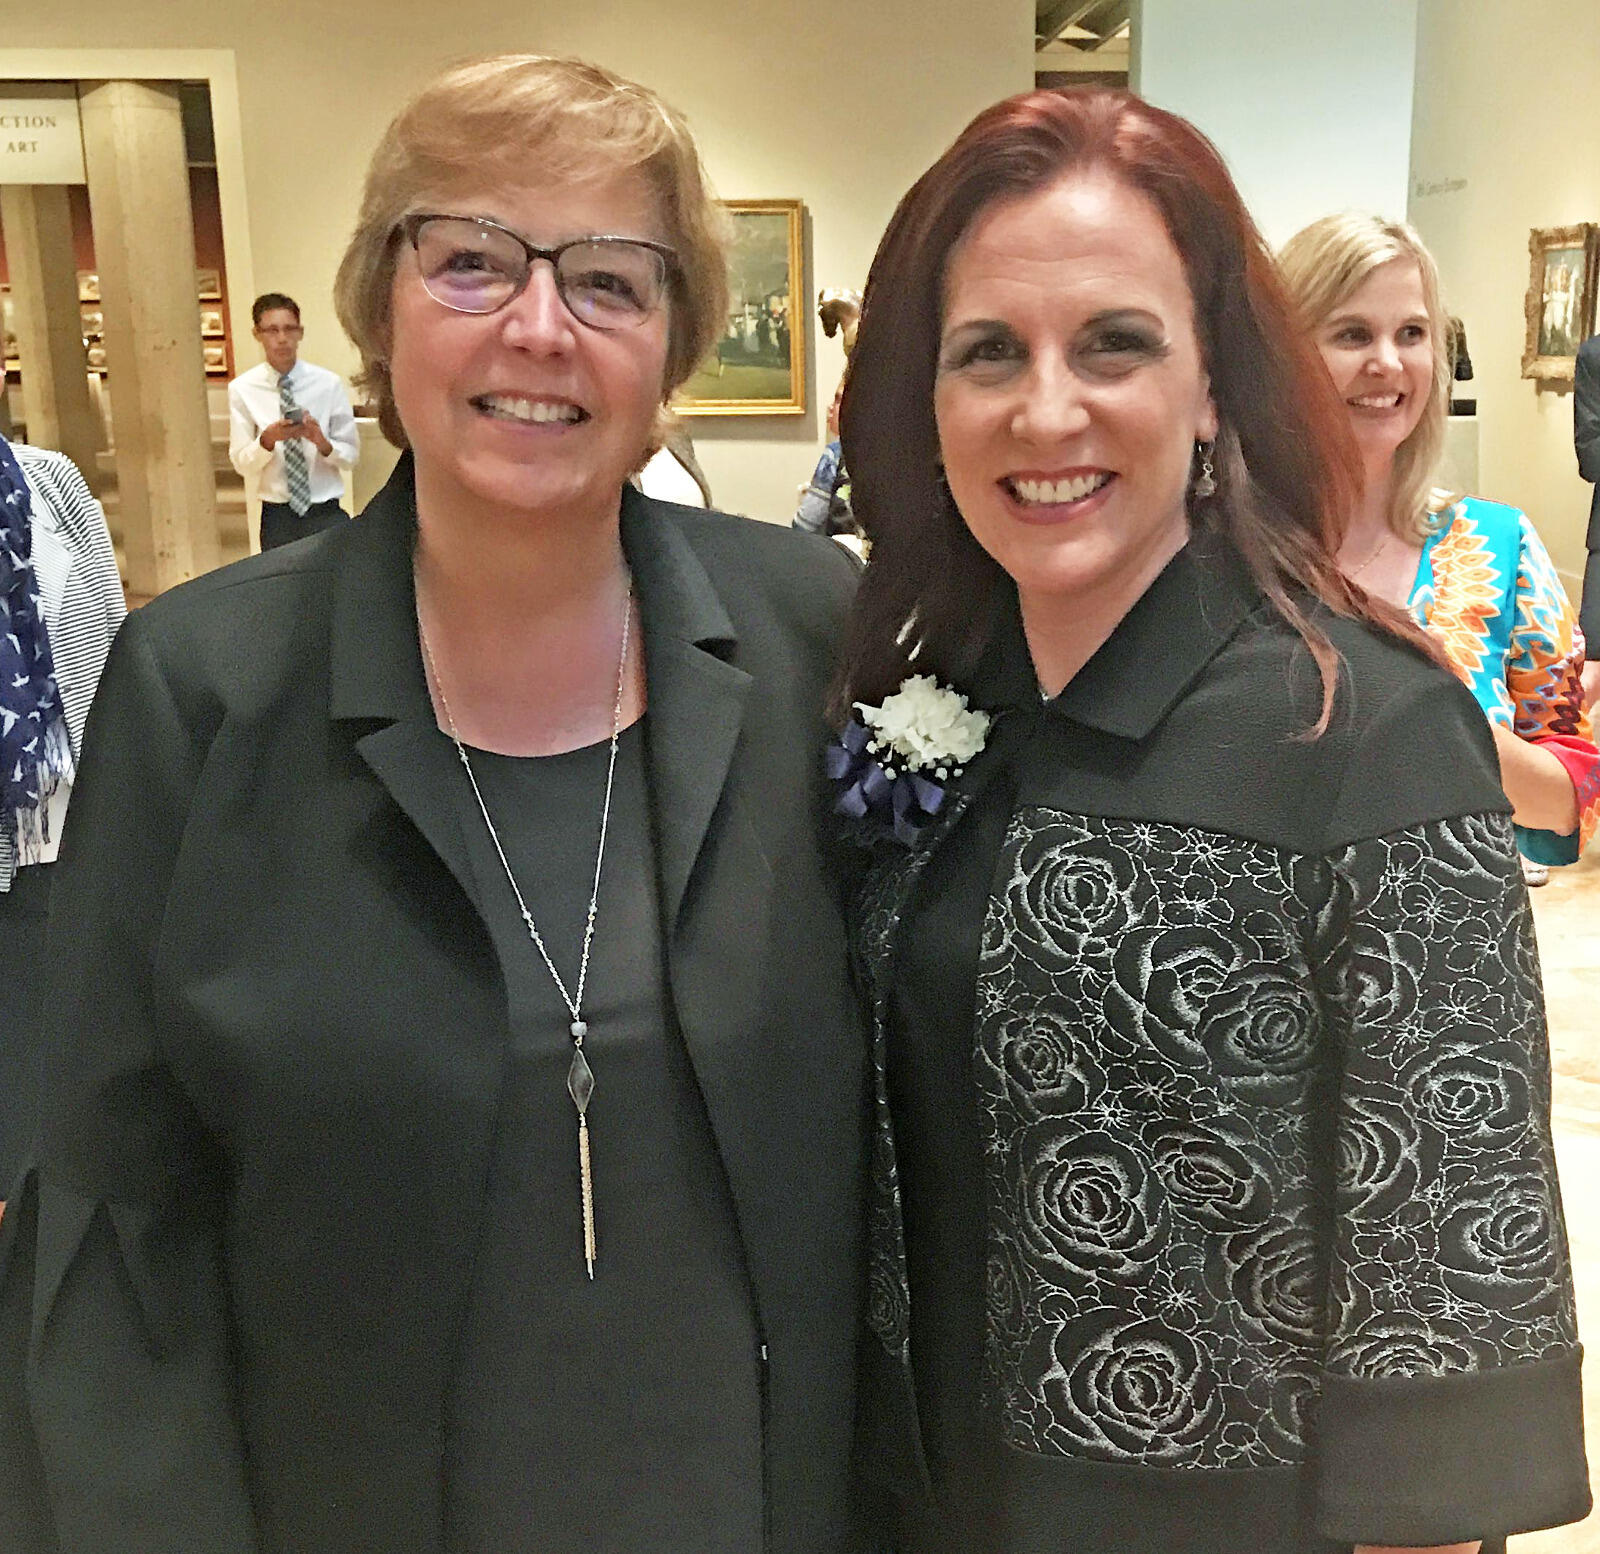 Greenlee (Lee) Naughton, Ph.D. (right), and Colleen Thoma, Ph.D., associate dean for academic affairs and graduate studies at the VCU School of Education, at the 2018 Virginia Teacher of the Year Ceremony at VMFA.